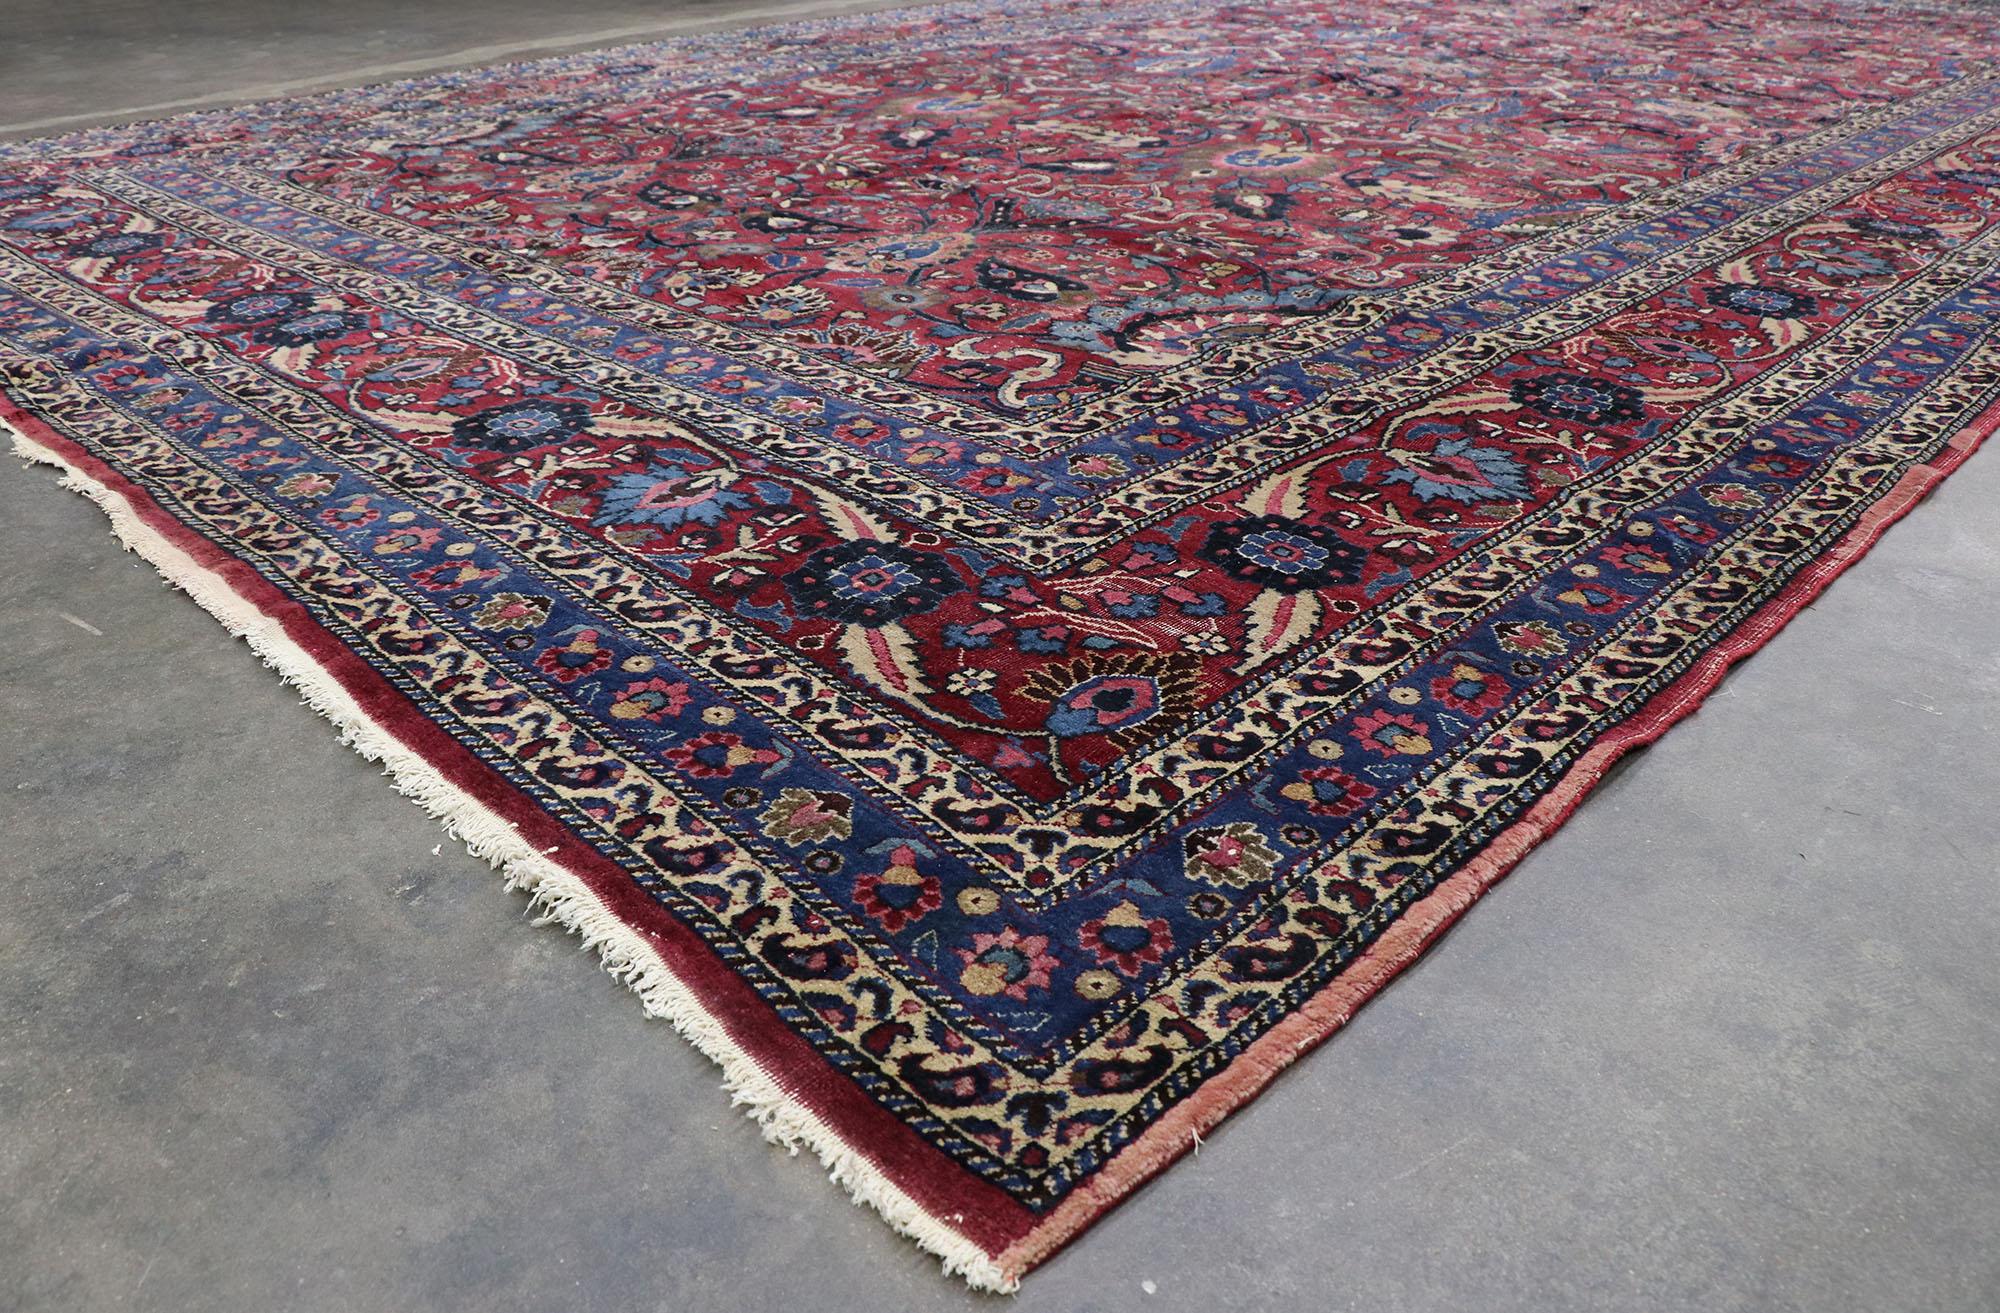 20th Century Antique Persian Mashhad Rug with Rustic Victorian Style For Sale